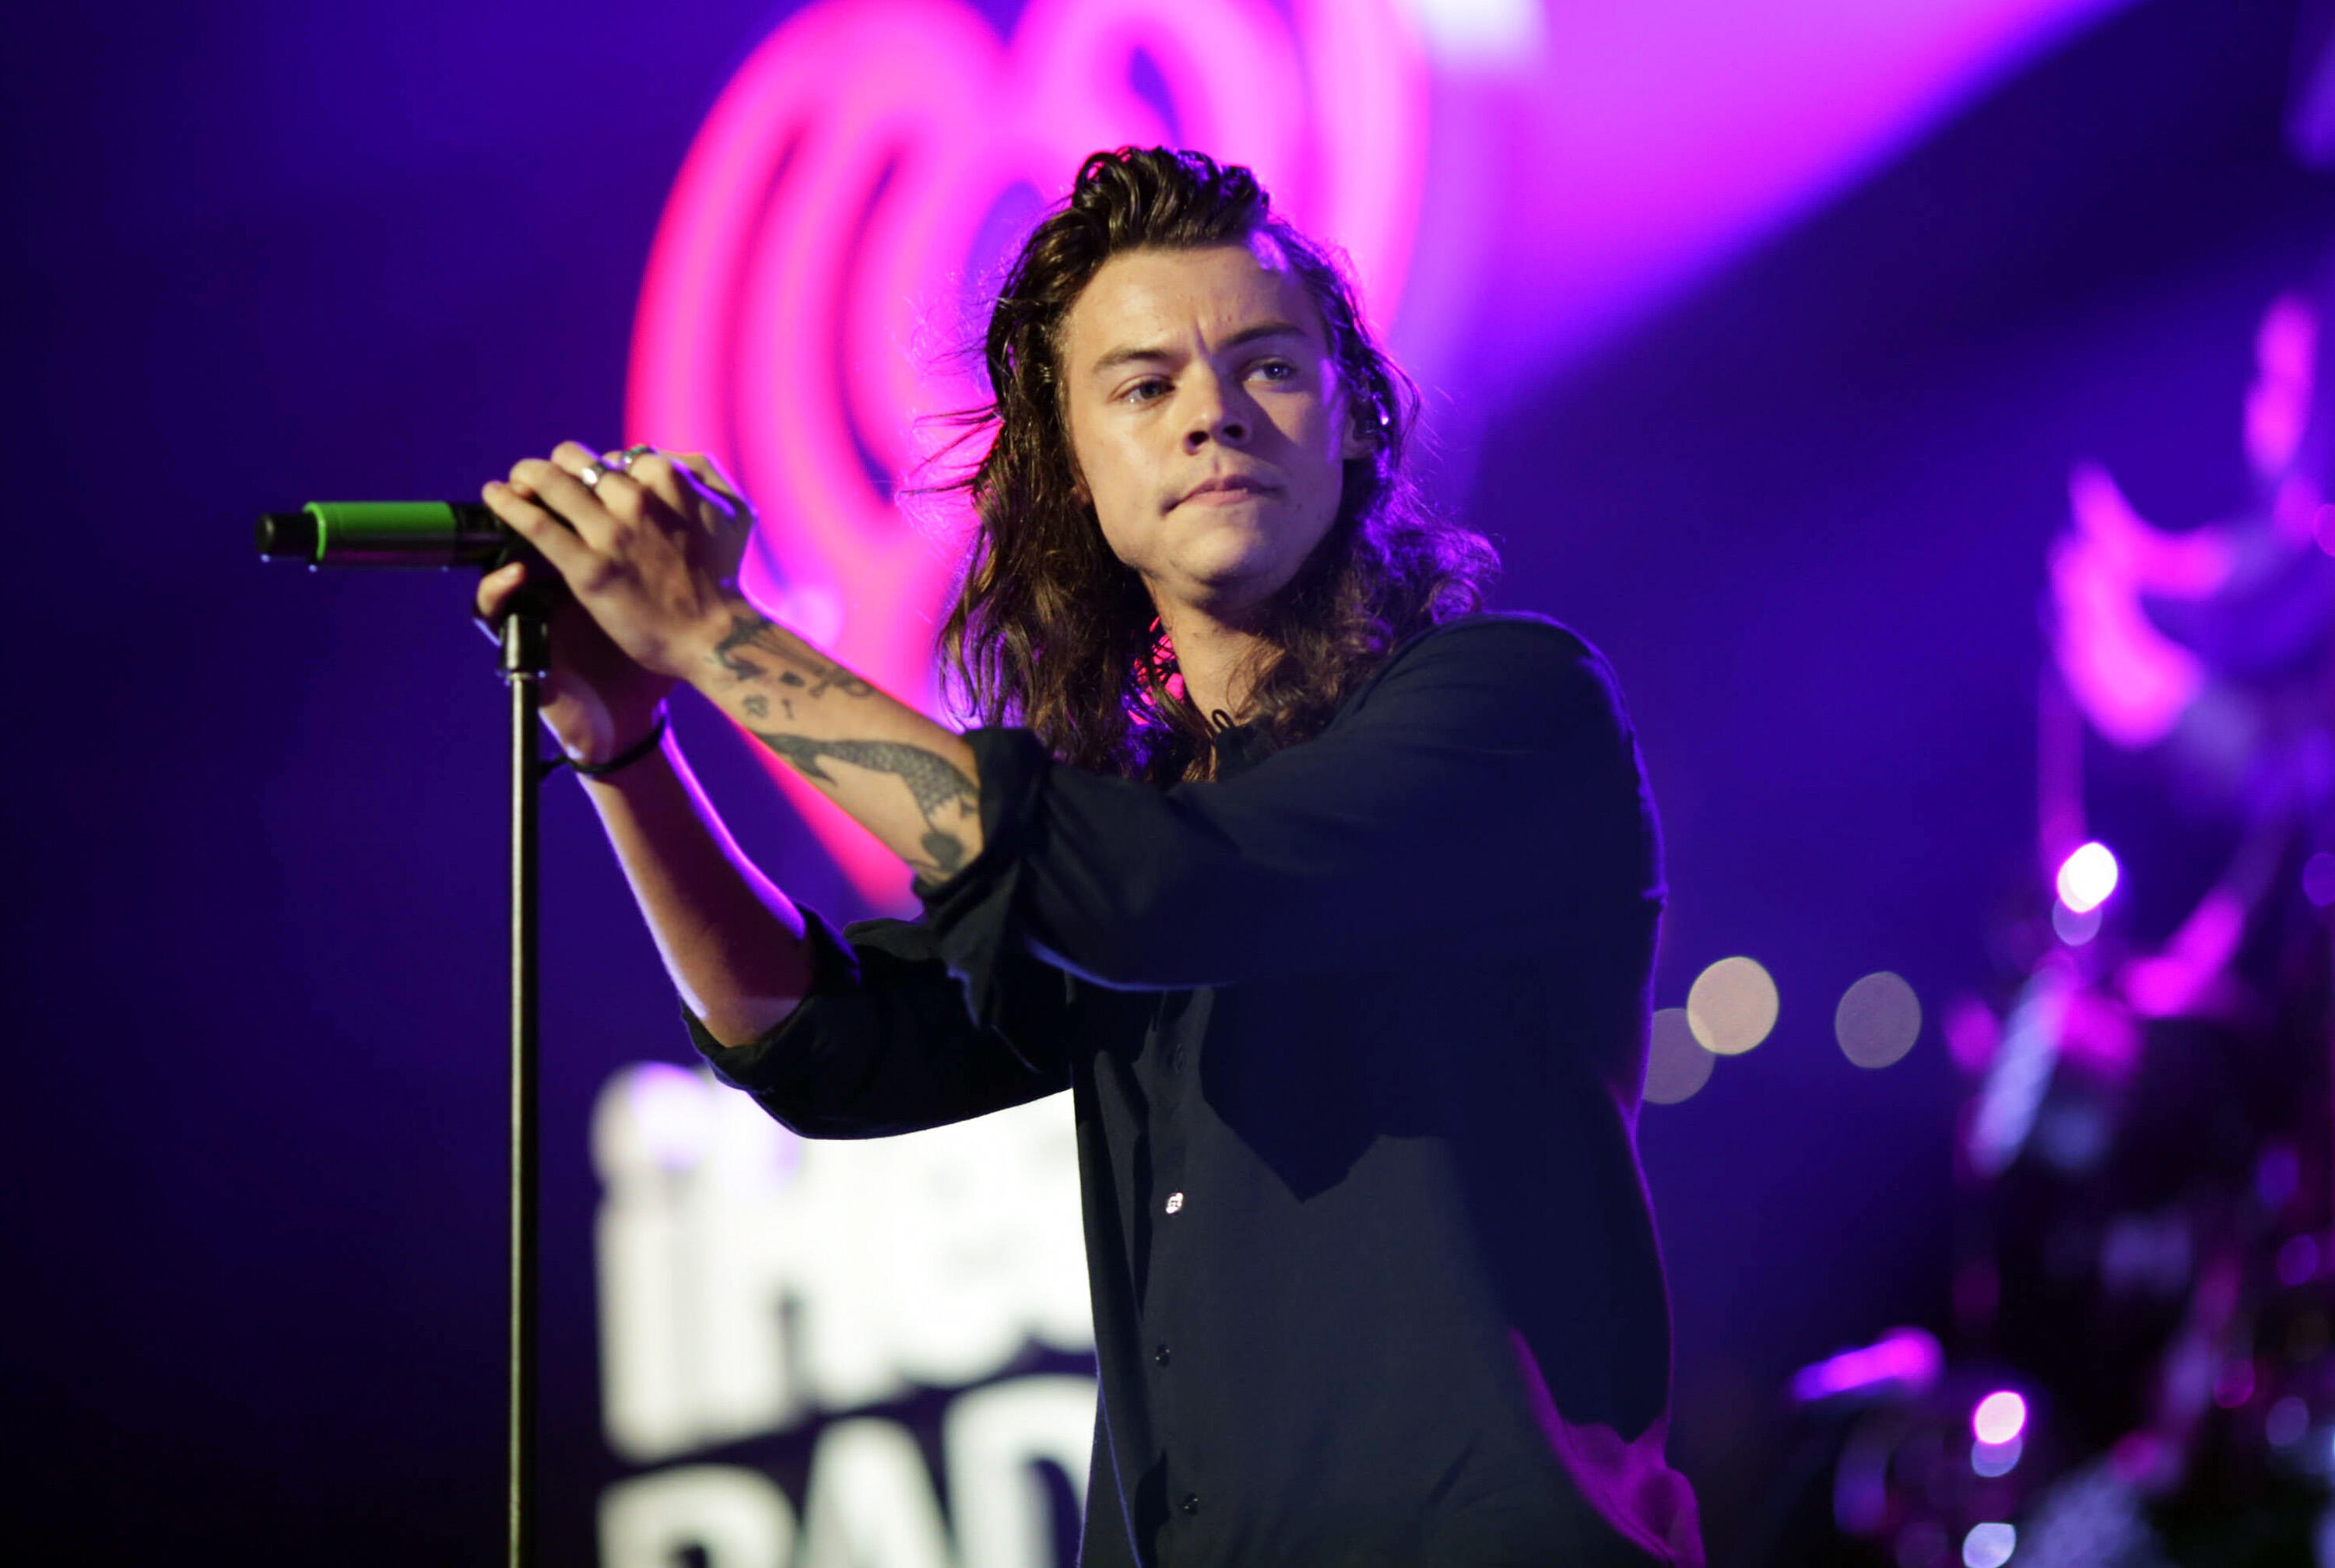 LOS ANGELES, CA - DECEMBER 04:  (EDITORS NOTE: IMAGE WAS PROCESSED USING DIGITAL FILTERS) Recording artist Harry Styles of music group One Direction performs onstage during 102.7 KIIS FMs Jingle Ball 2015 Presented by Capital One at STAPLES CENTER on De